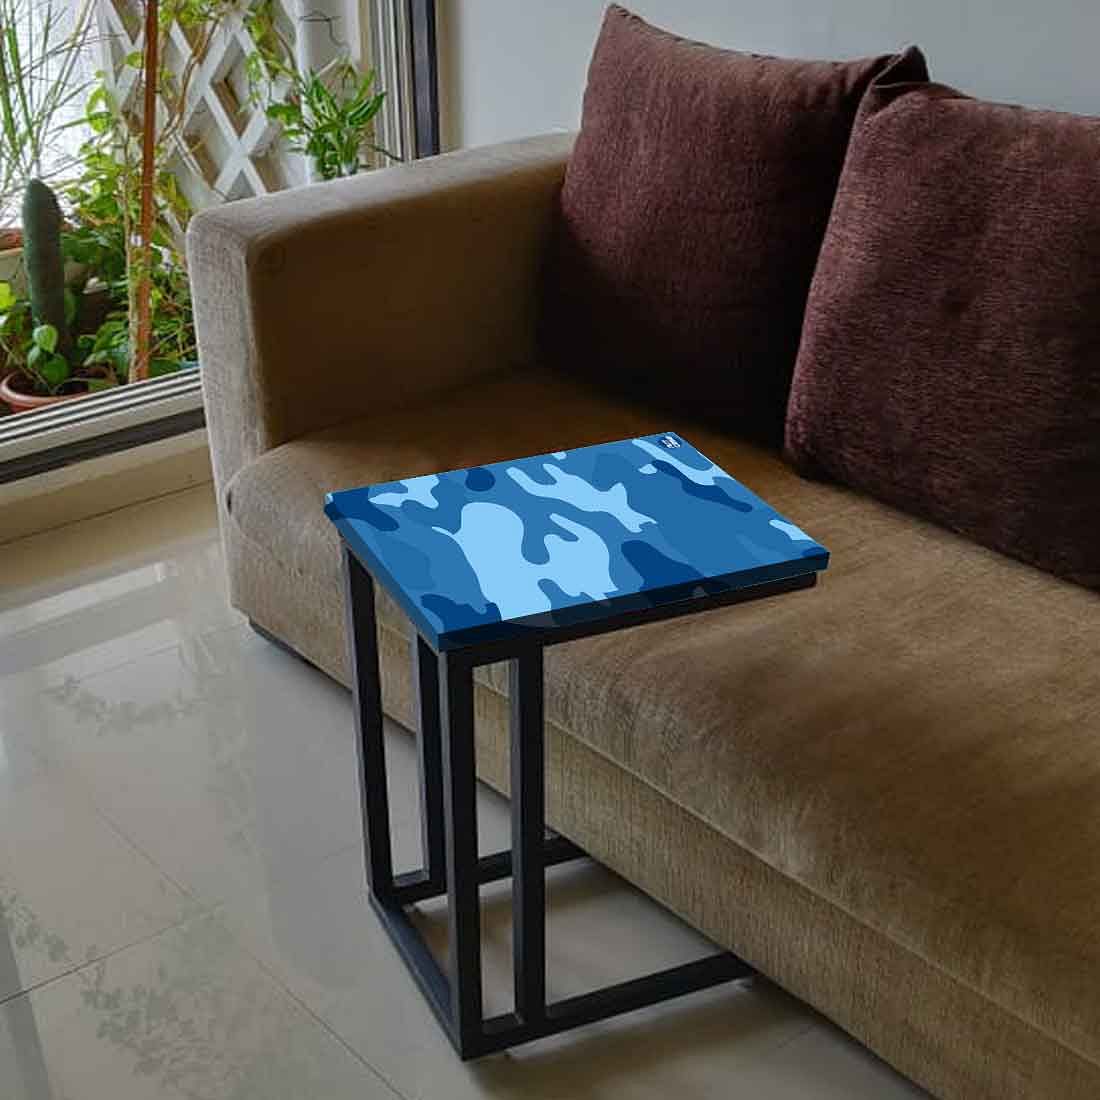 Blue C Shaped Table For Sofa - Army Camouflage Blue Nutcase